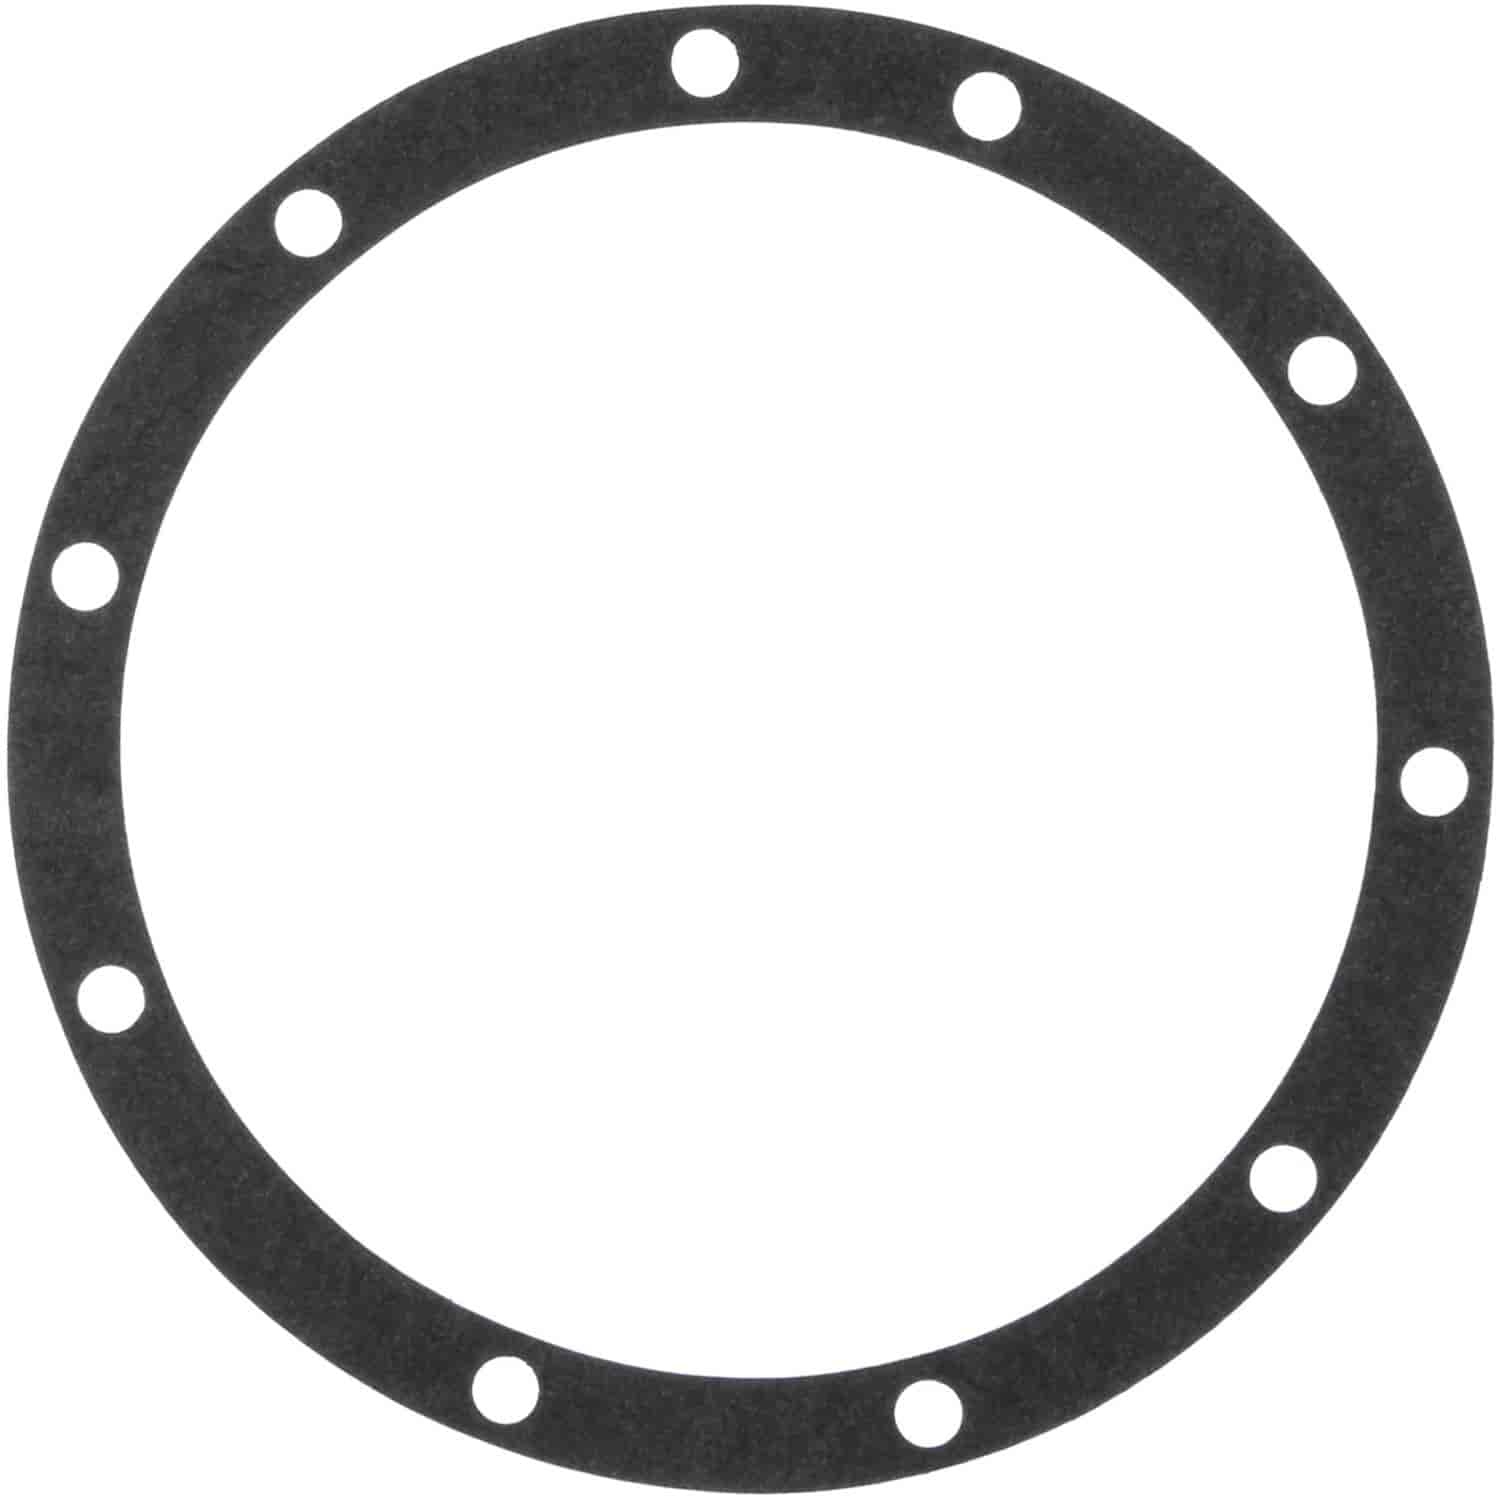 Differential Carrier Gasket 1955-1978 Chrysler/Dodge/Plymouth